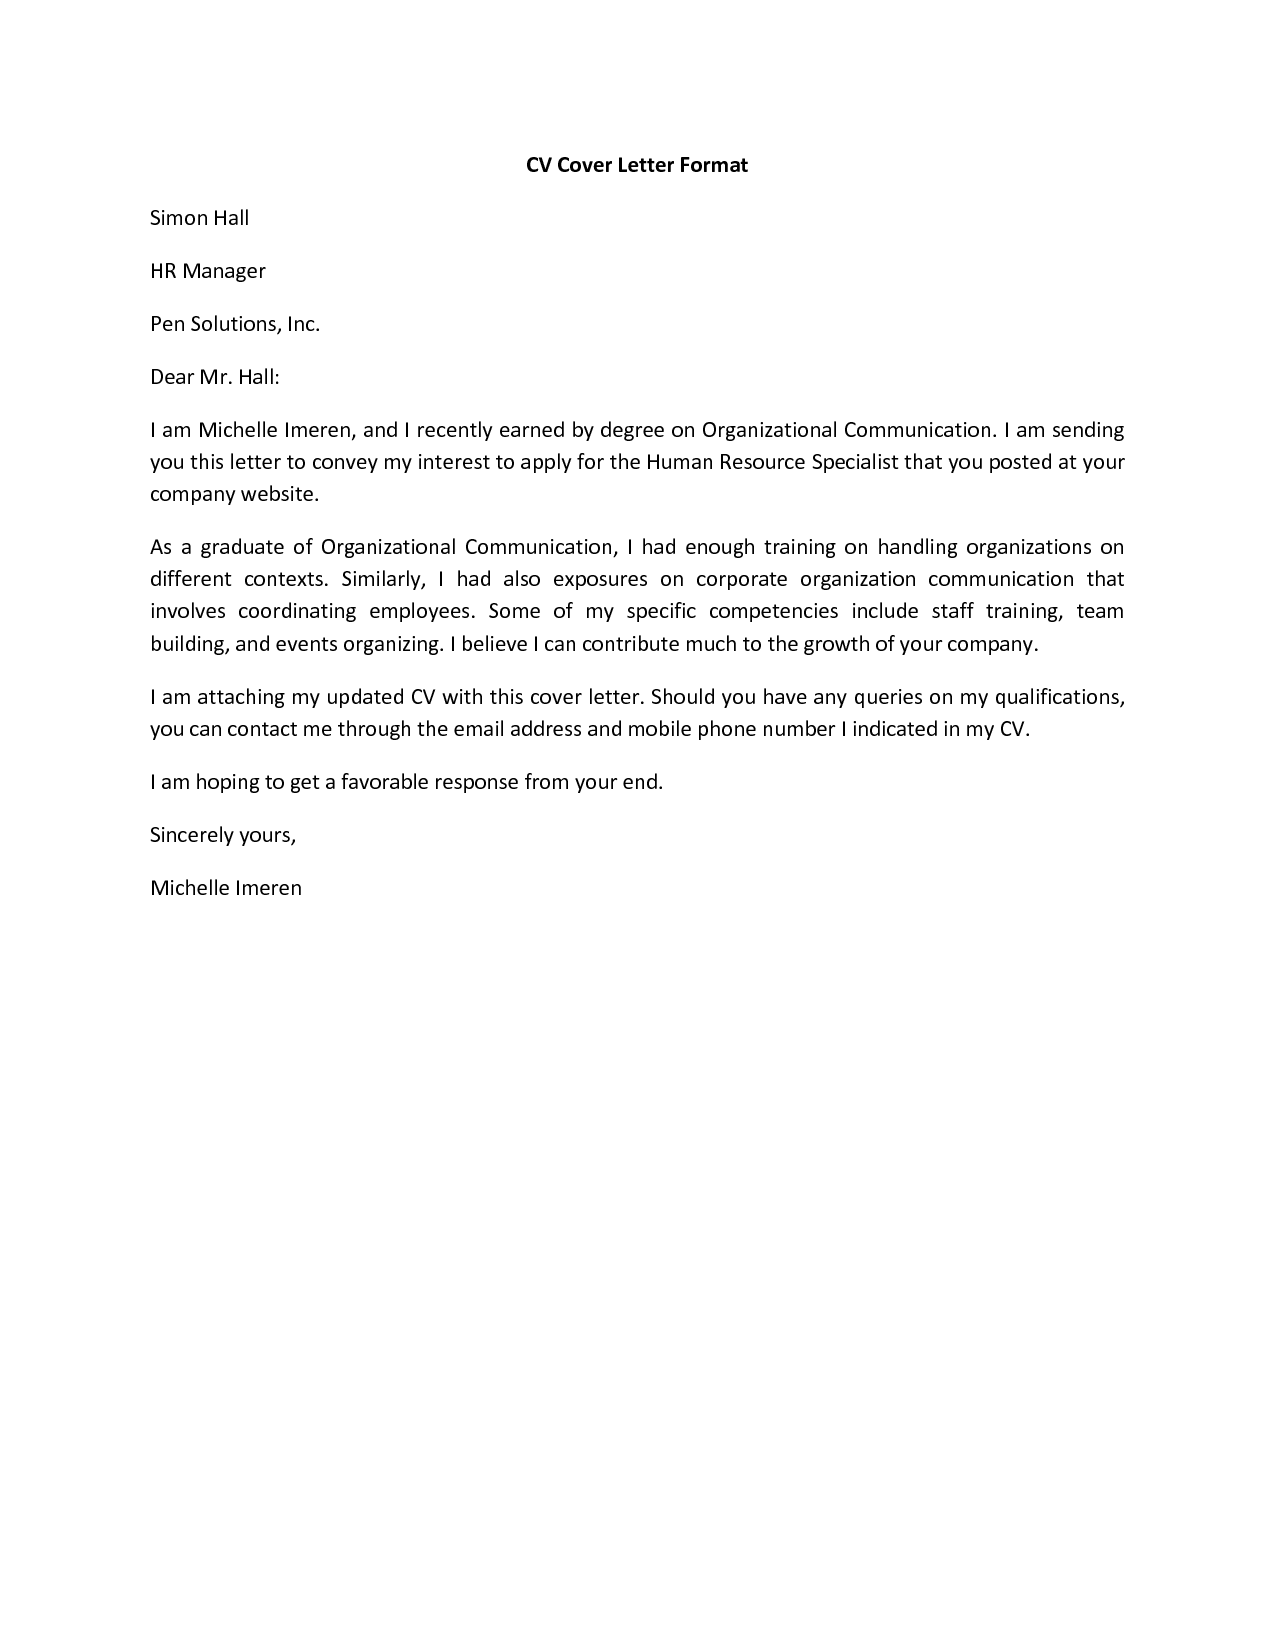 example cover letter for resume